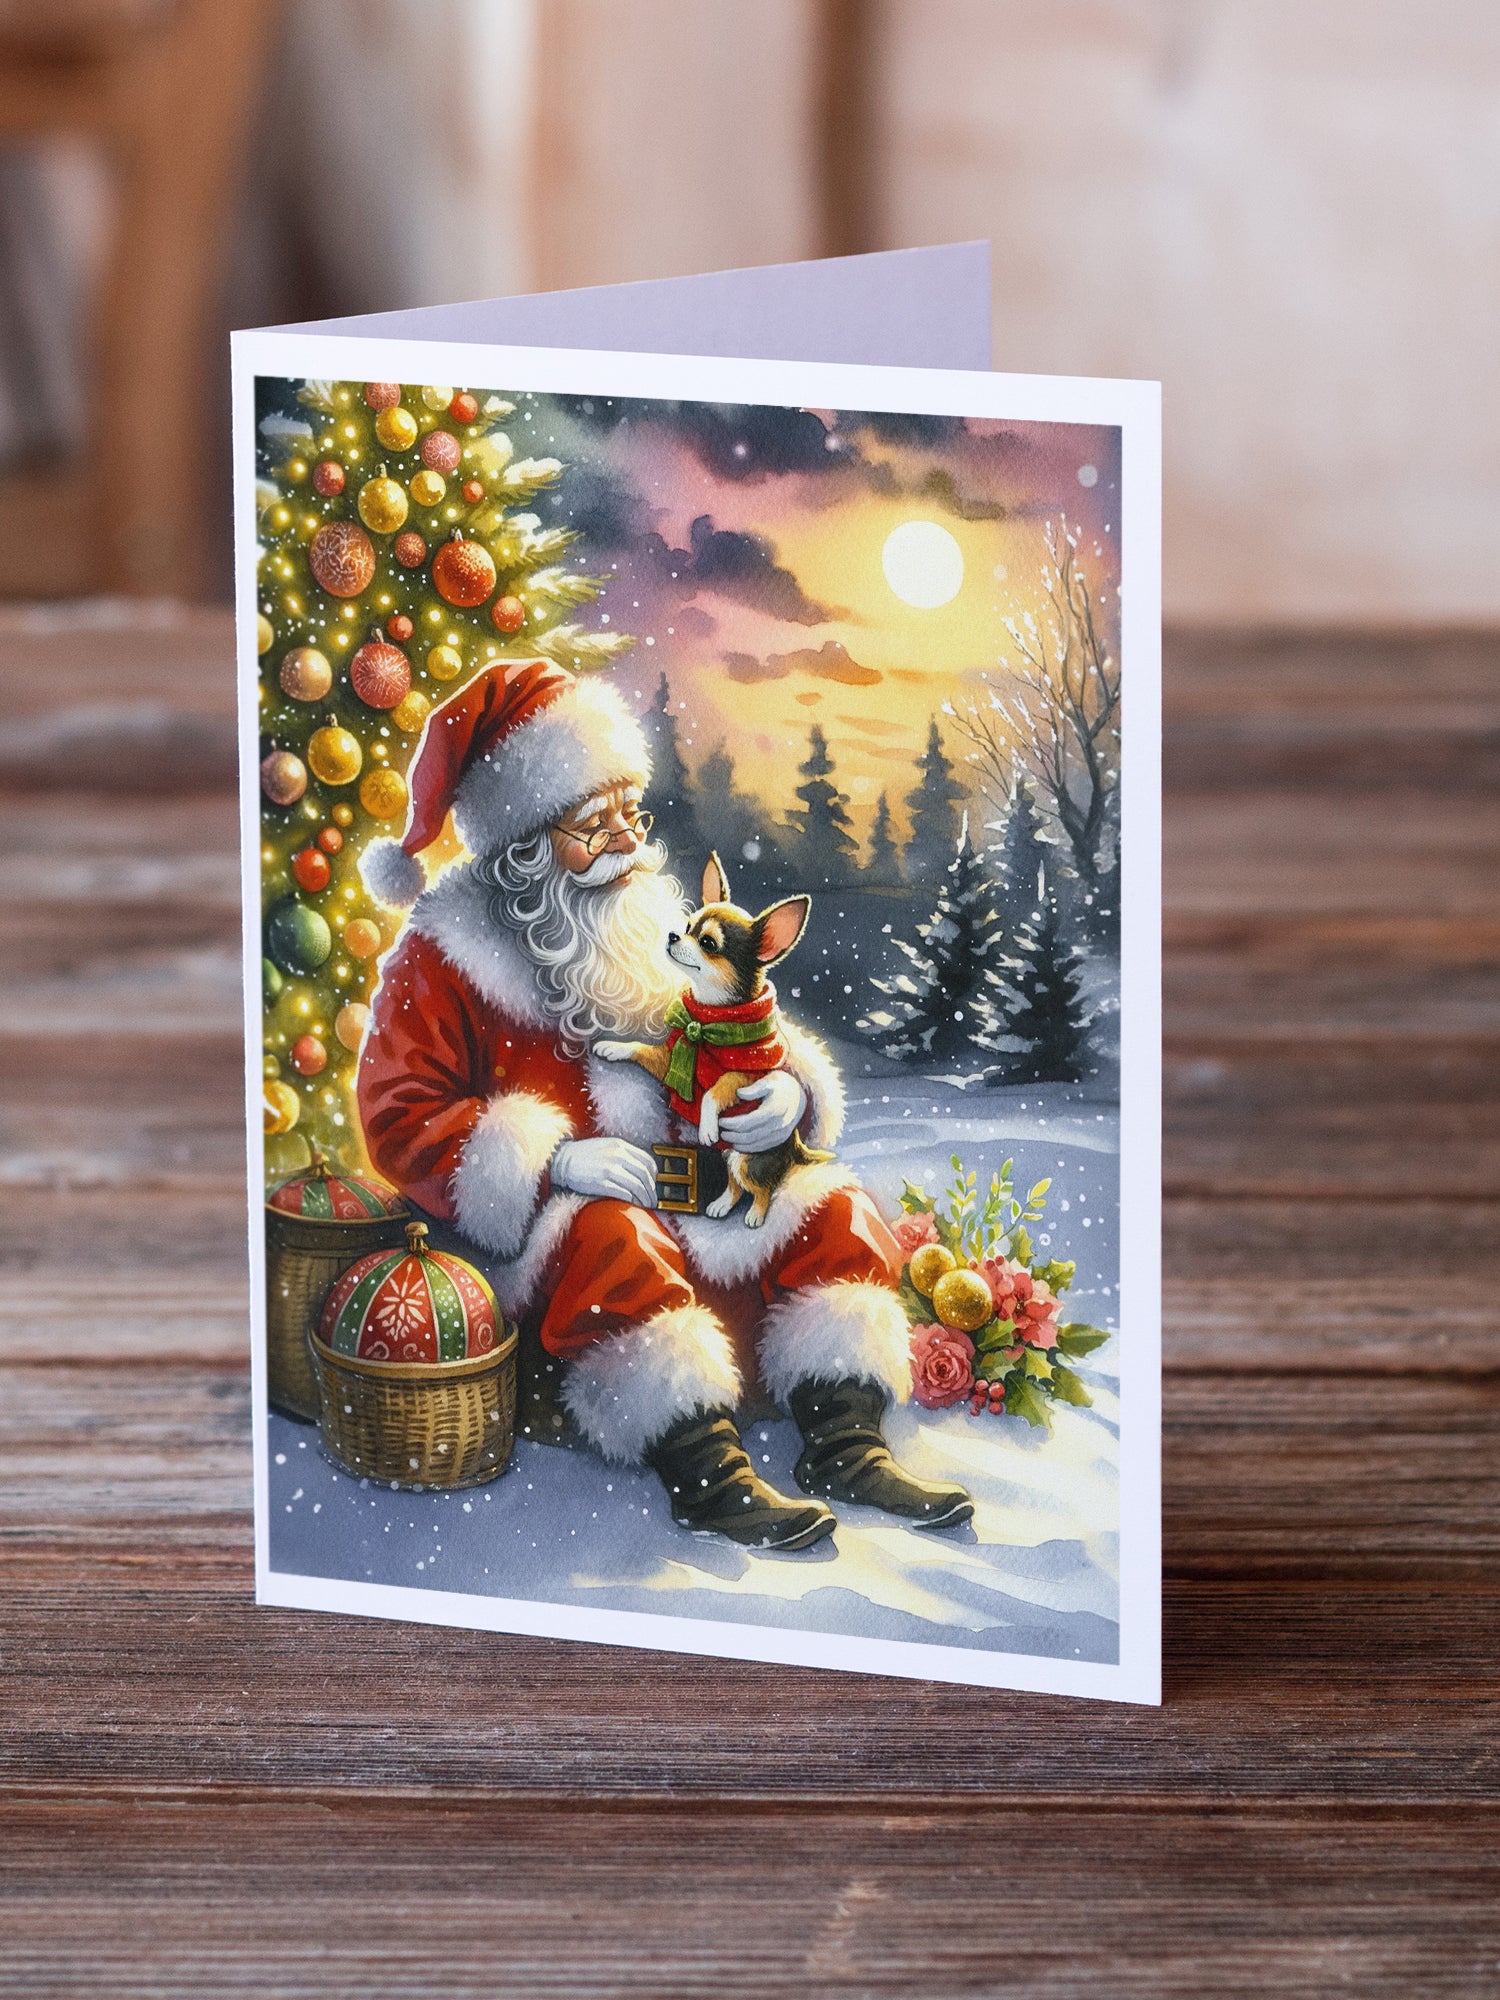 Buy this Chihuahua and Santa Claus Greeting Cards Pack of 8